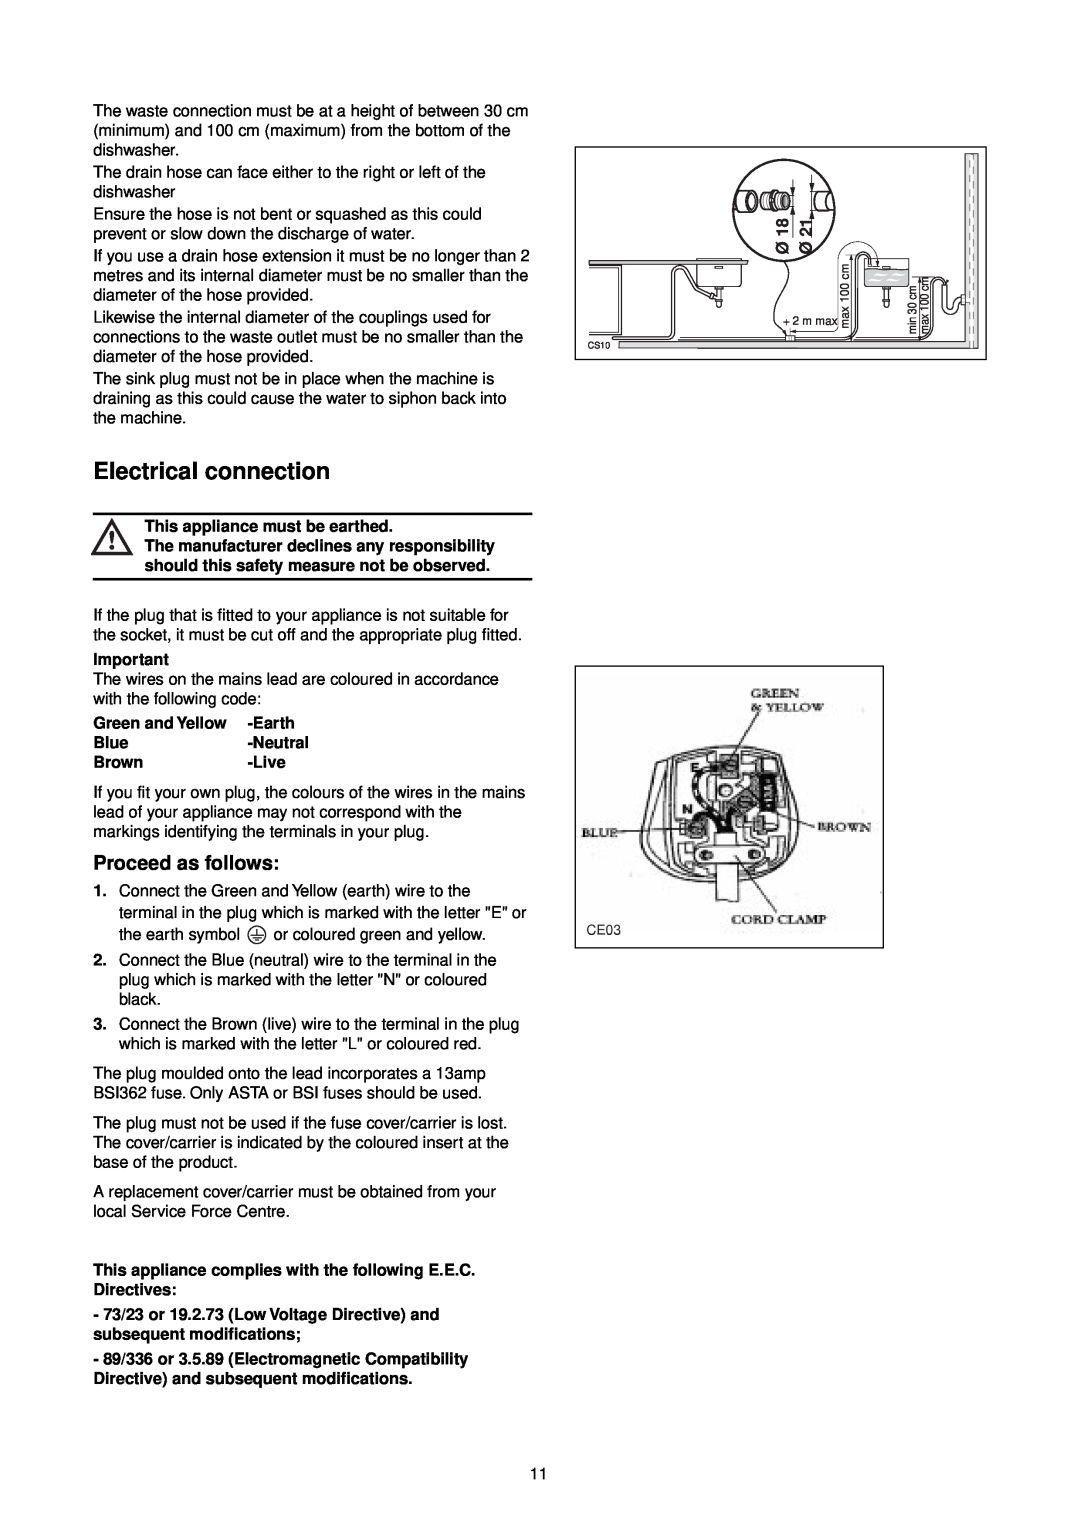 Zanussi ZT 695 manual Electrical connection, Proceed as follows 